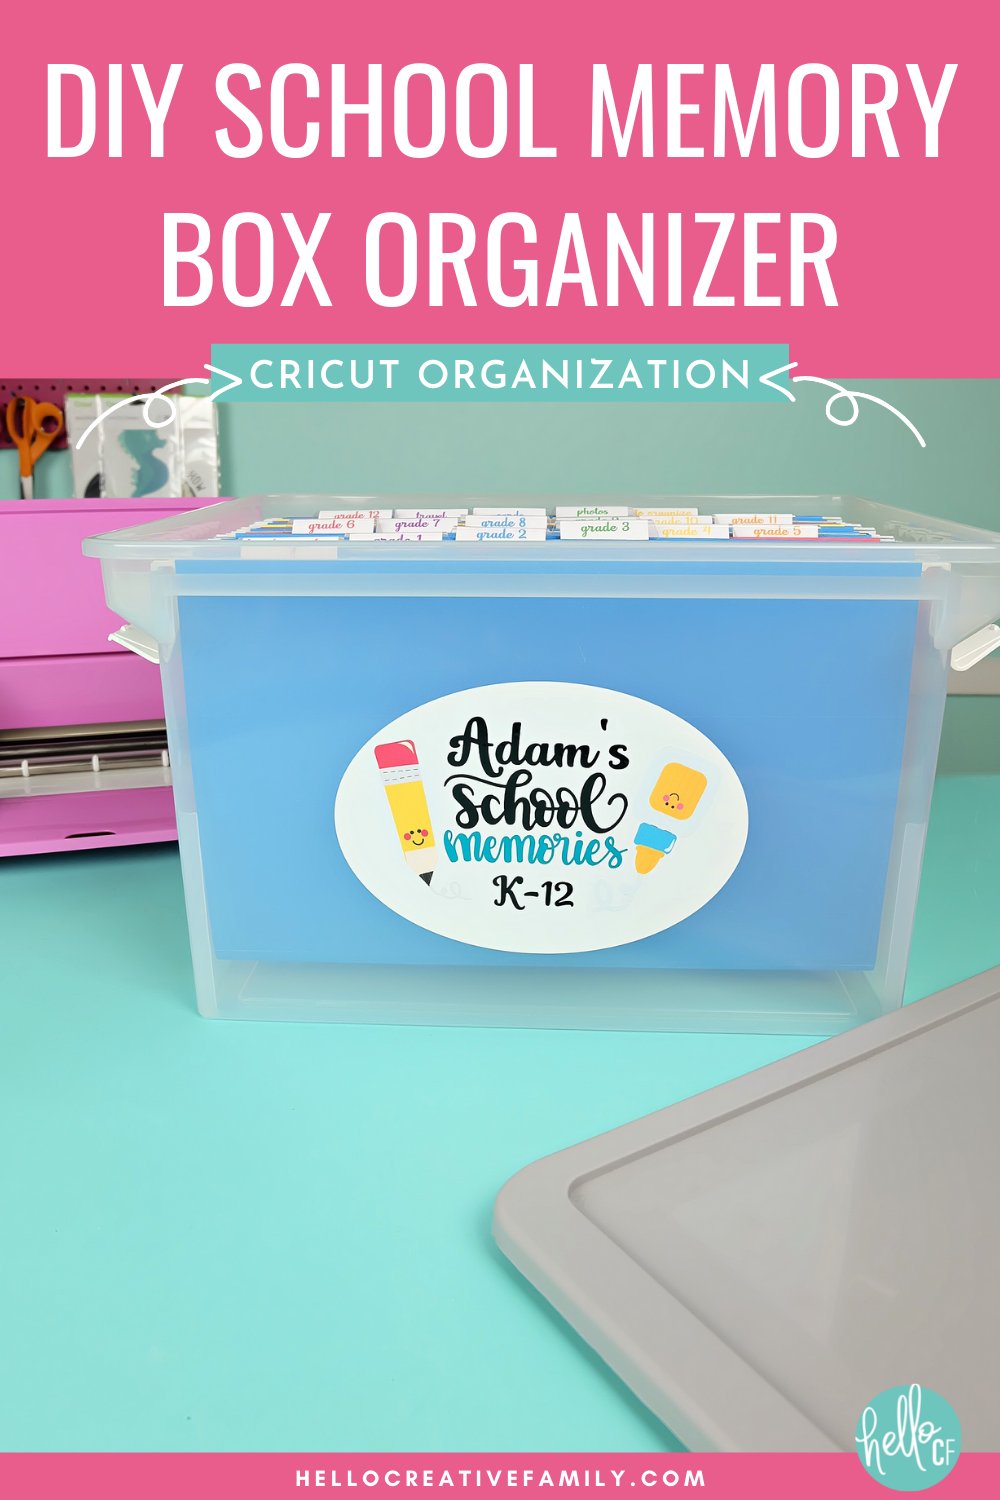 Get rid of the clutter and organize the precious mementoes that your children bring home from school with this DIY Cricut Memory Box Organizer! Hold onto and organize your childrens' special crafty keepsakes throughout their years. Includes the Cricut cut file for making this project with your Cricut Explore or Cricut Maker.